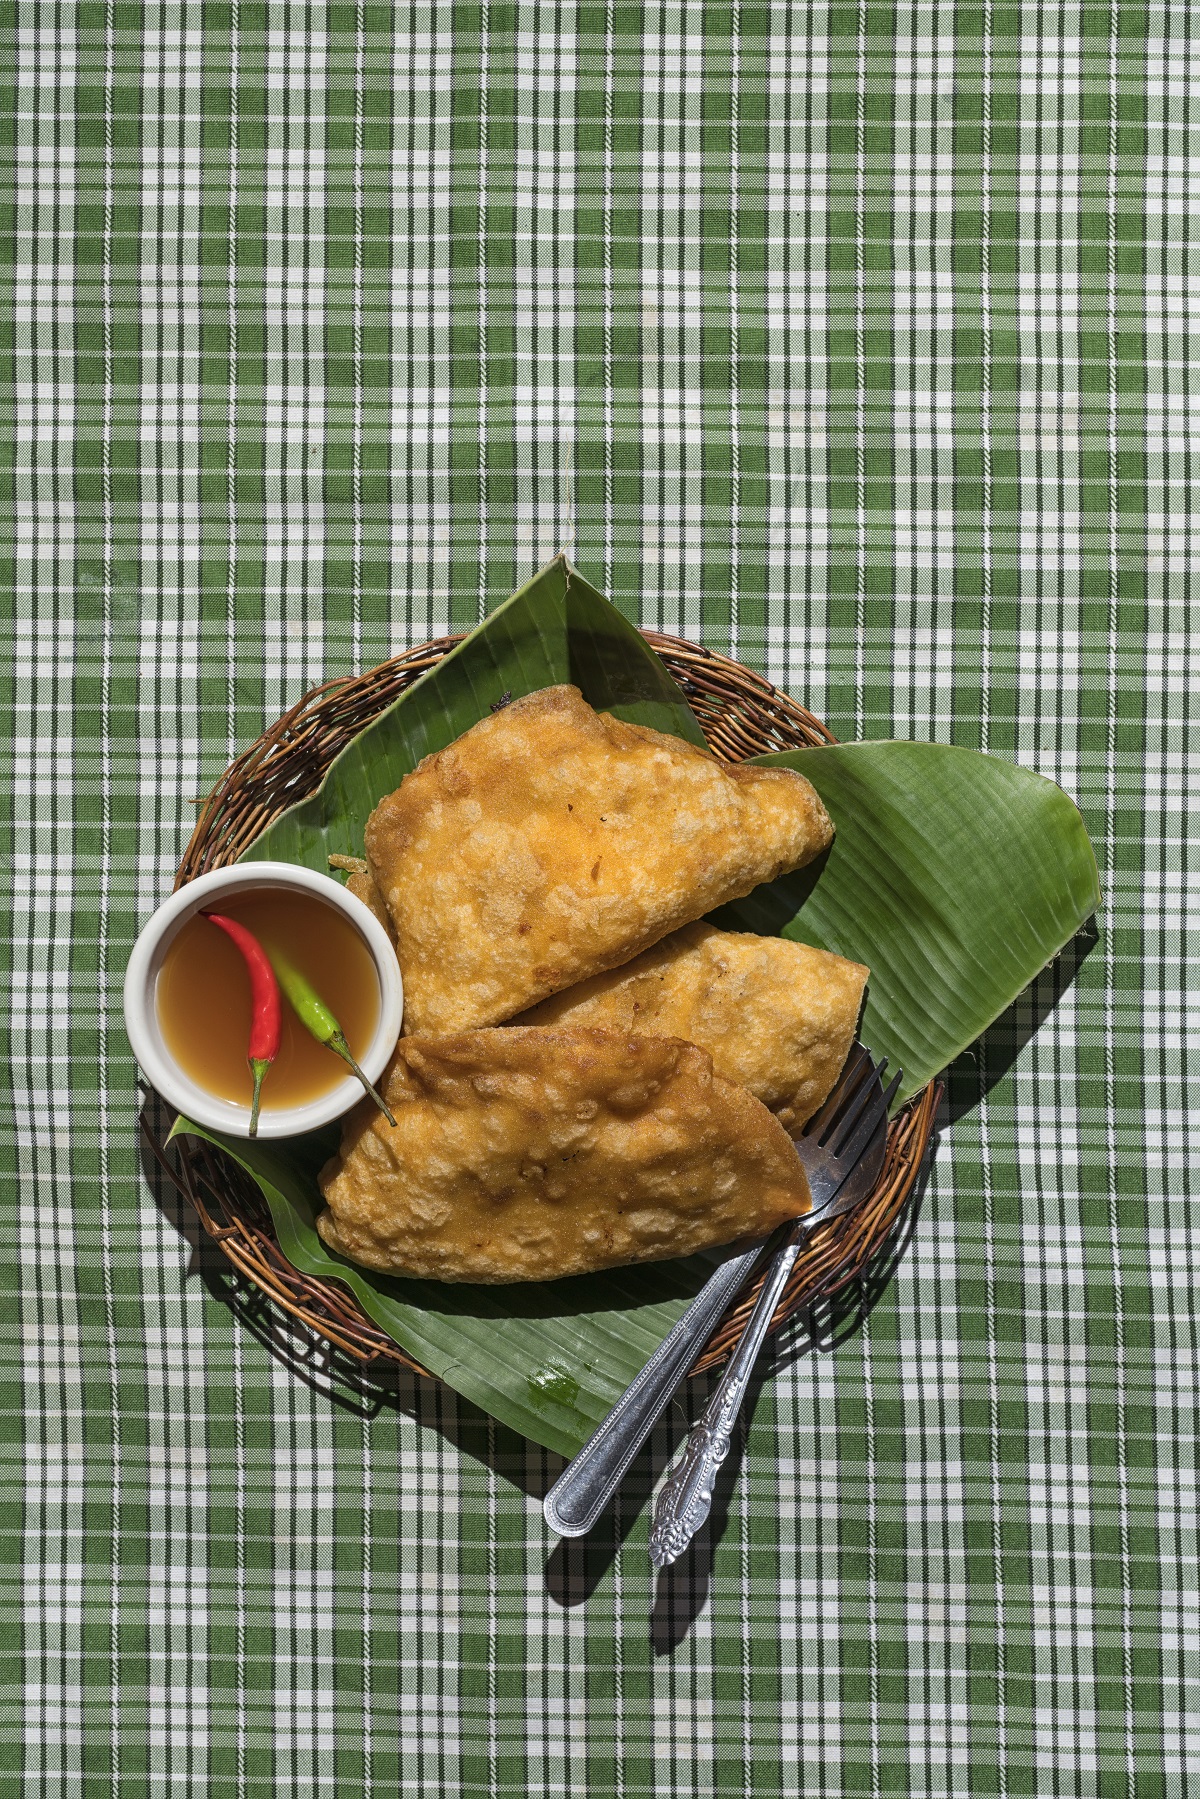 Ilocos empanada is simply rice wrapper filled with various ingredients, then deep-fried in a wok with hot oil